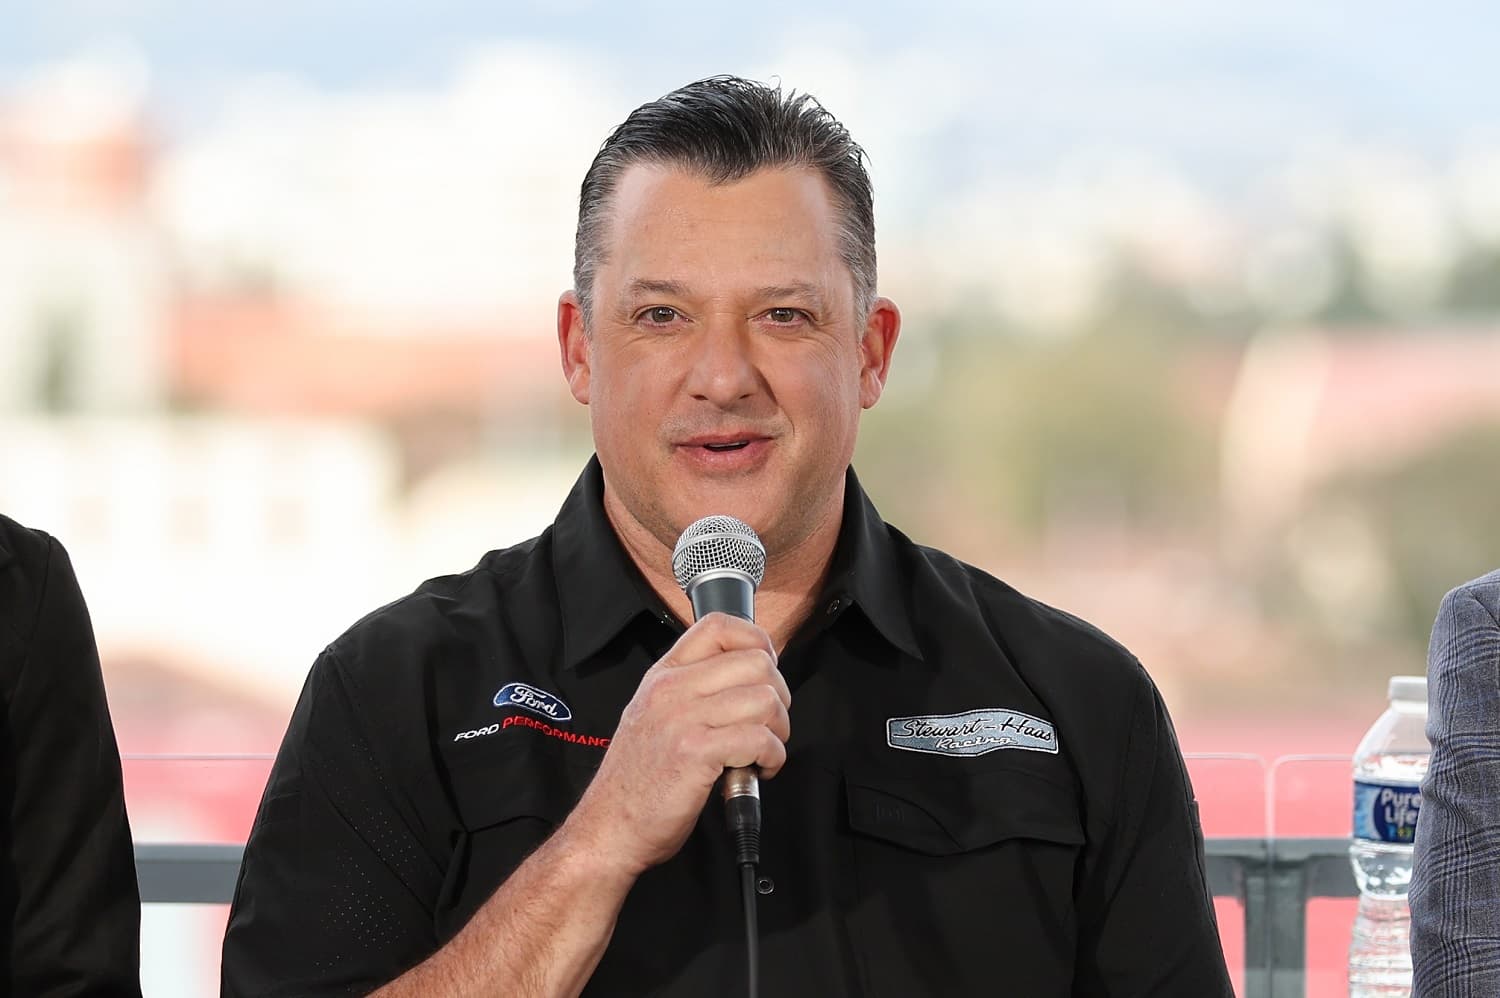 NASCAR Hall of Famer and broadcaster Tony Stewart attends the Fox Sports NASCAR press conference at Los Angeles Coliseum on Feb. 3, 2023.